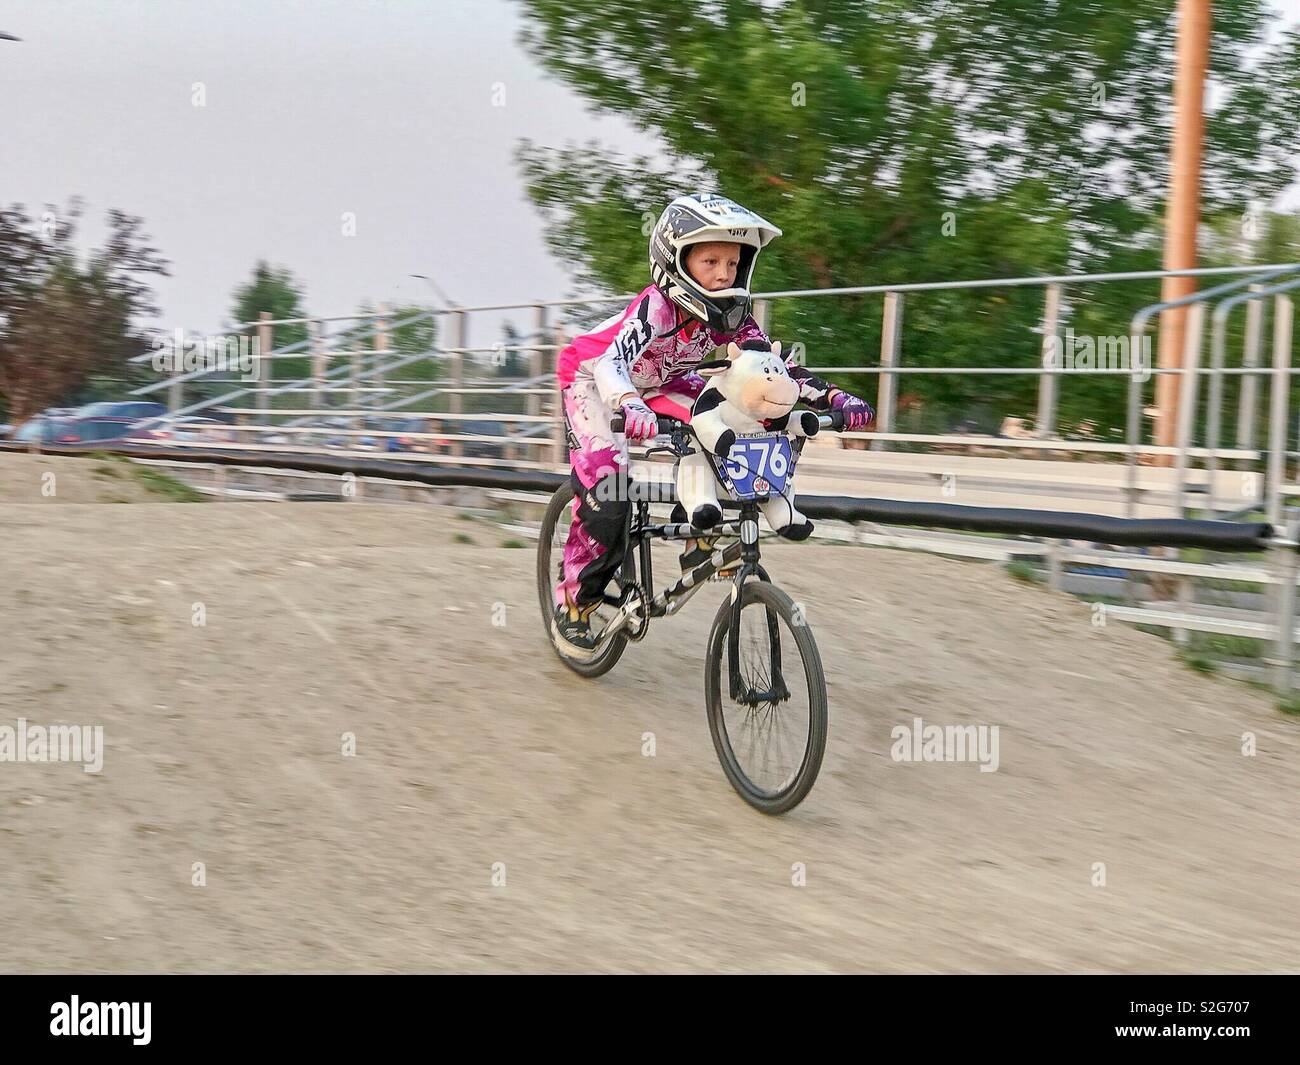 A girl races on a BMX track with her toy strapped to the handlebars. Stock Photo